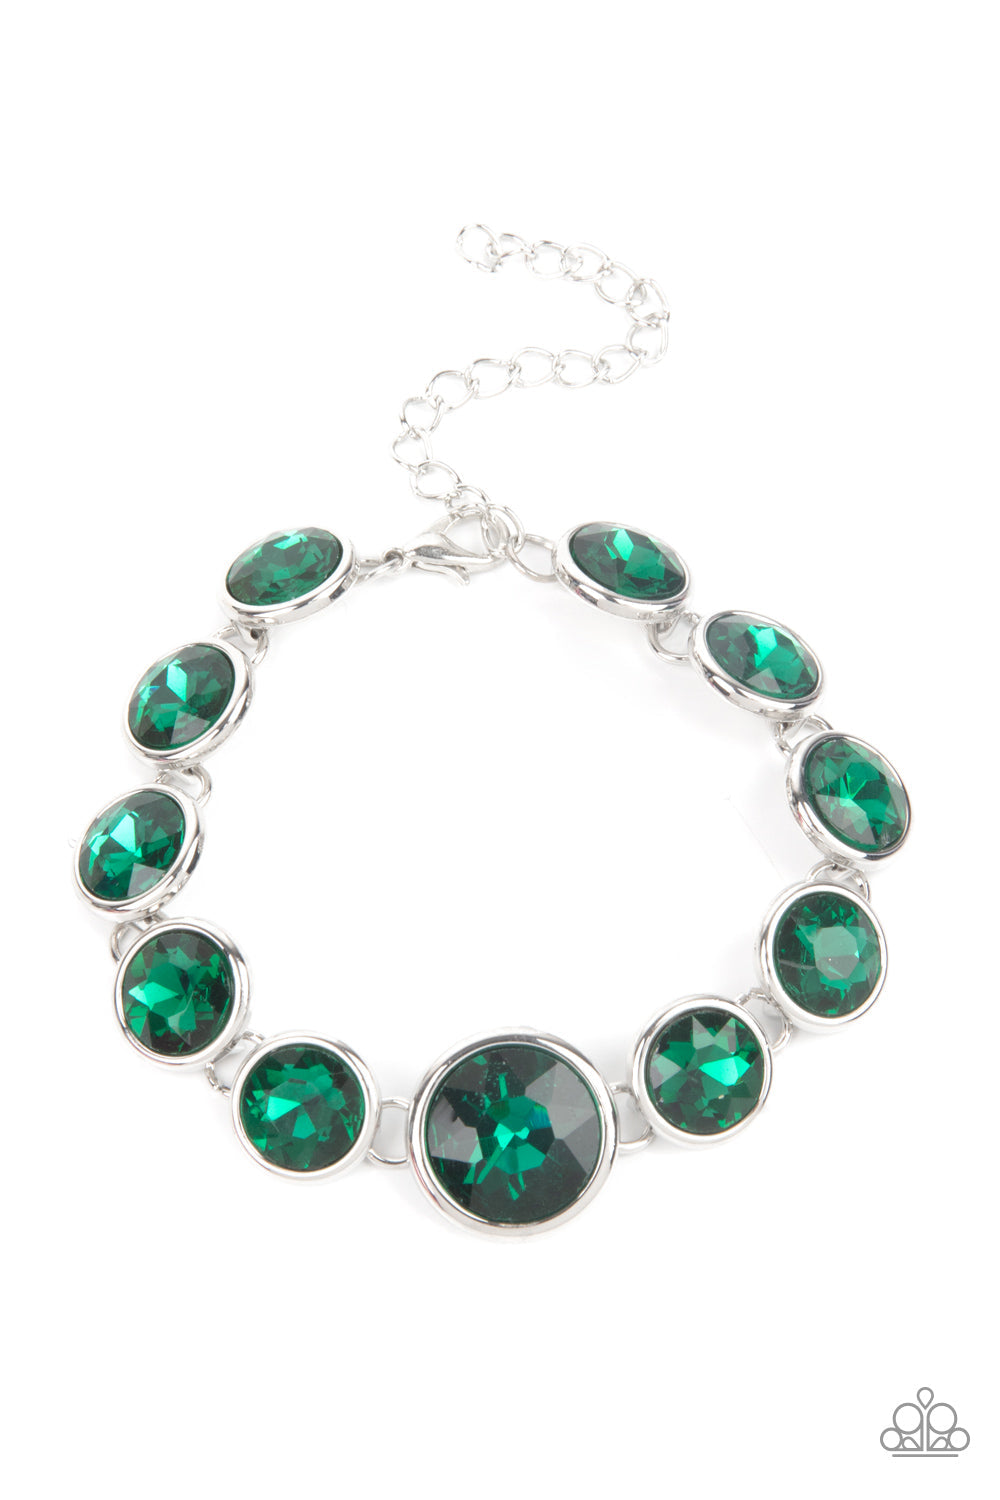 Lustrous Luminosity - Green and Silver Stylish Bracelet - Paparazzi Jewelry  - Bejeweled Accessories By Kristie - An oversized collection of sparkly green gems delicately link around the wrist for a glamorous finish.